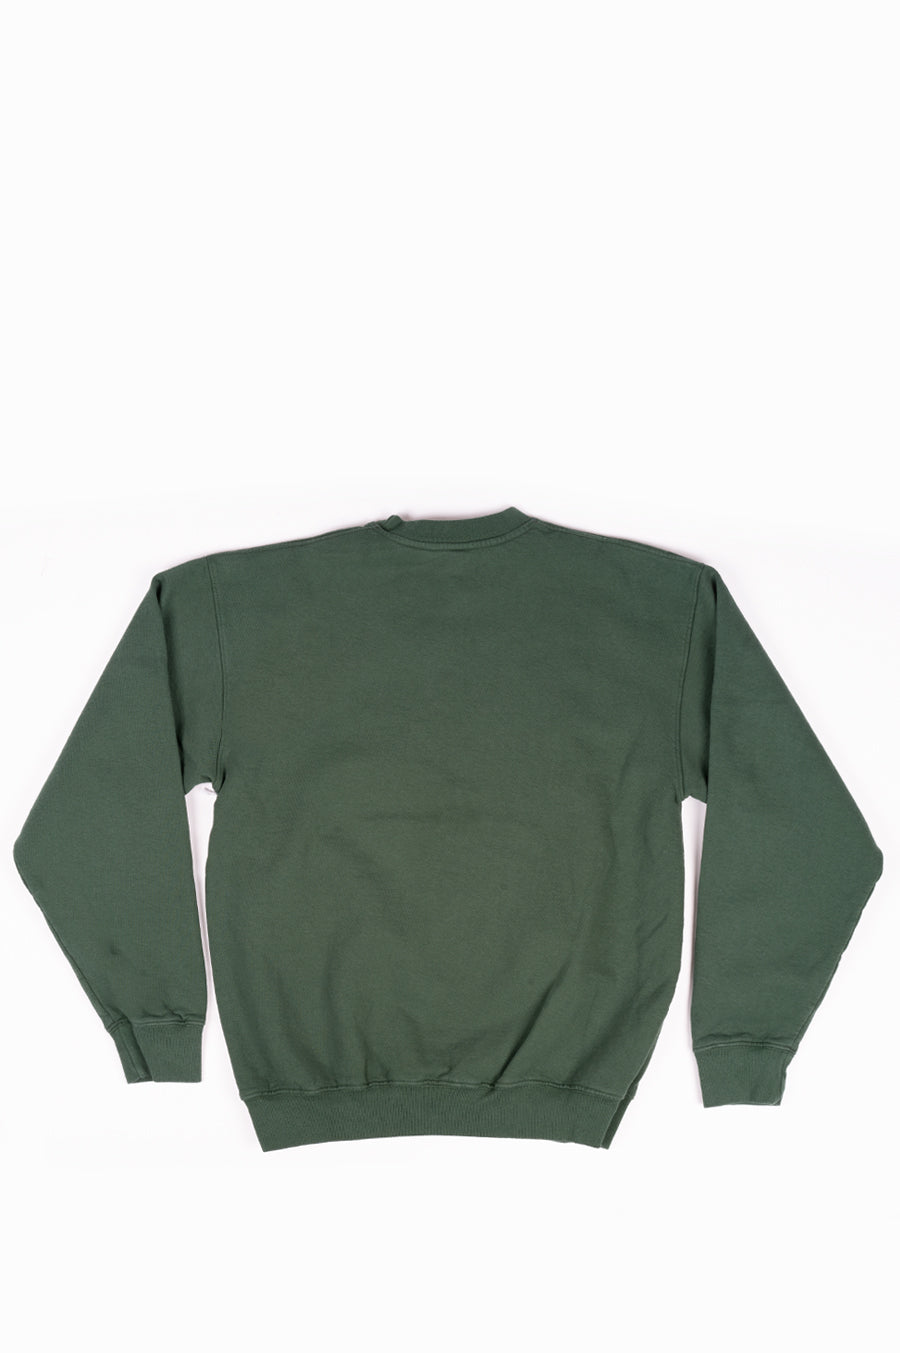 SPORTY AND RICH HEALTH & WELLNESS CREWNECK FOREST GREEN